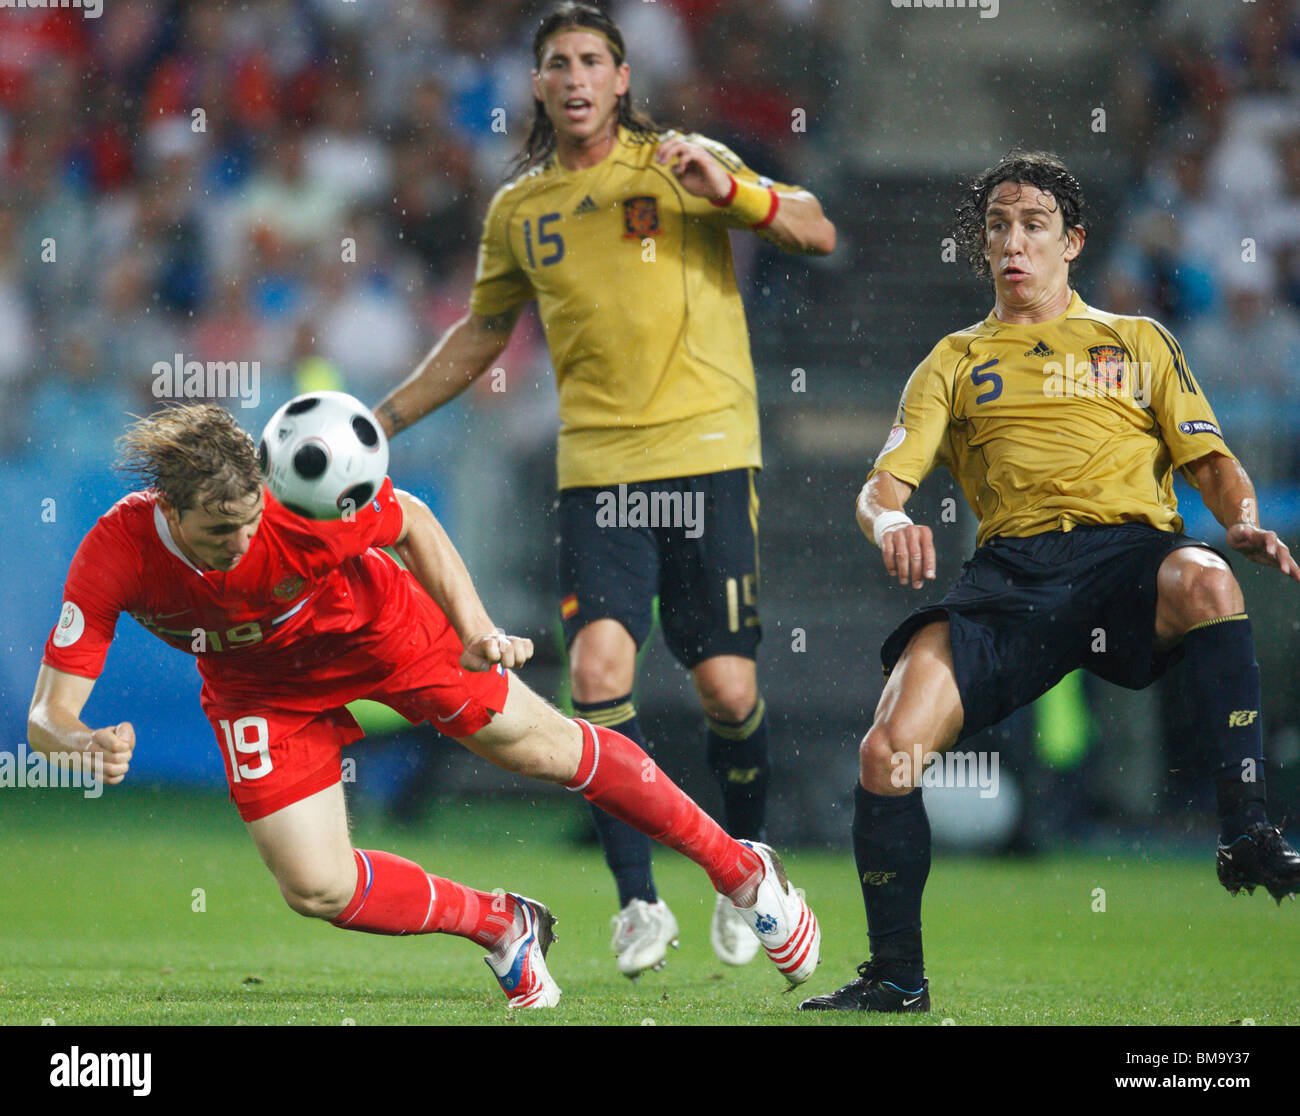 Roman Pavlyuchenko of Russia (19) heads the ball as Carles Puyol of Spain (5) defends during a UEFA Euro 2008 semi-final match. Stock Photo